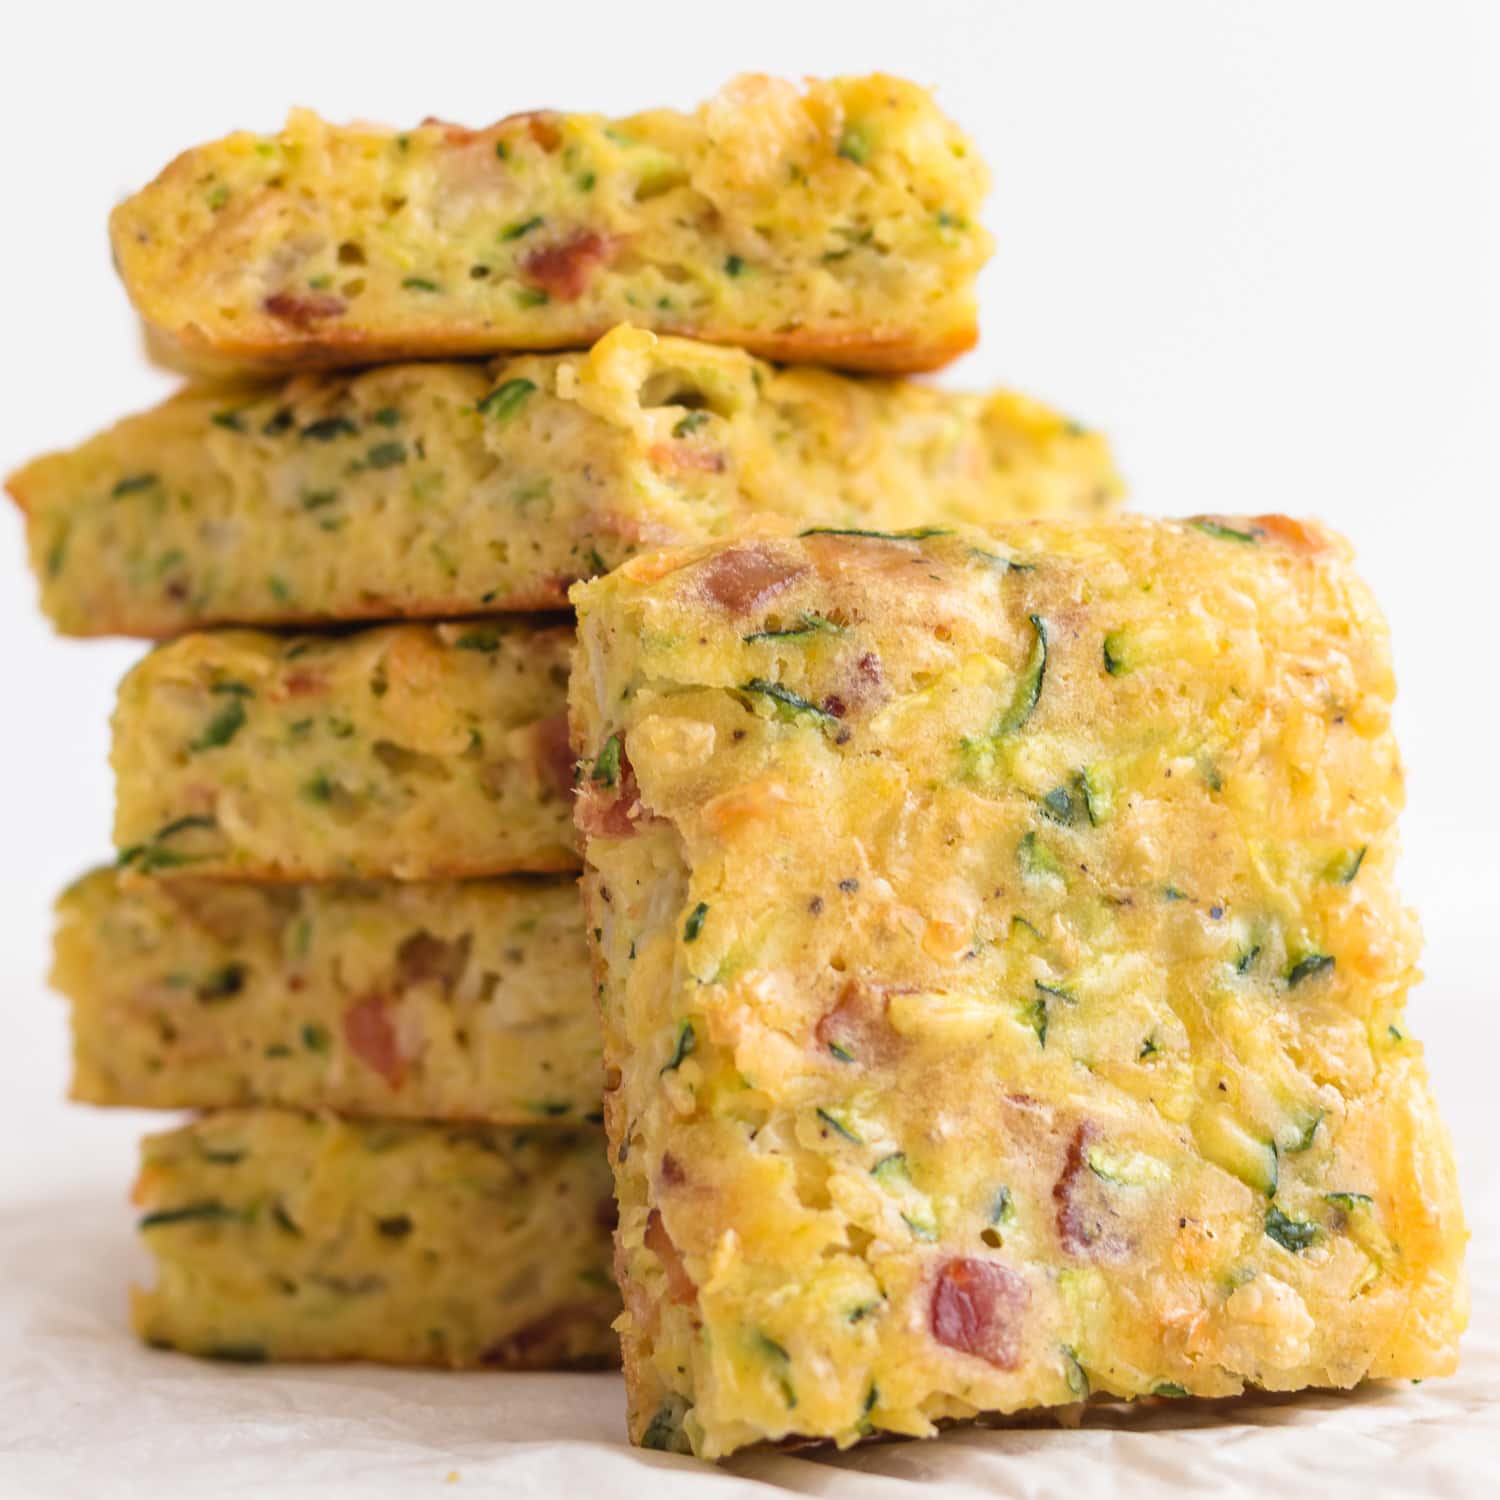 Pile of zucchini slice on a white background.